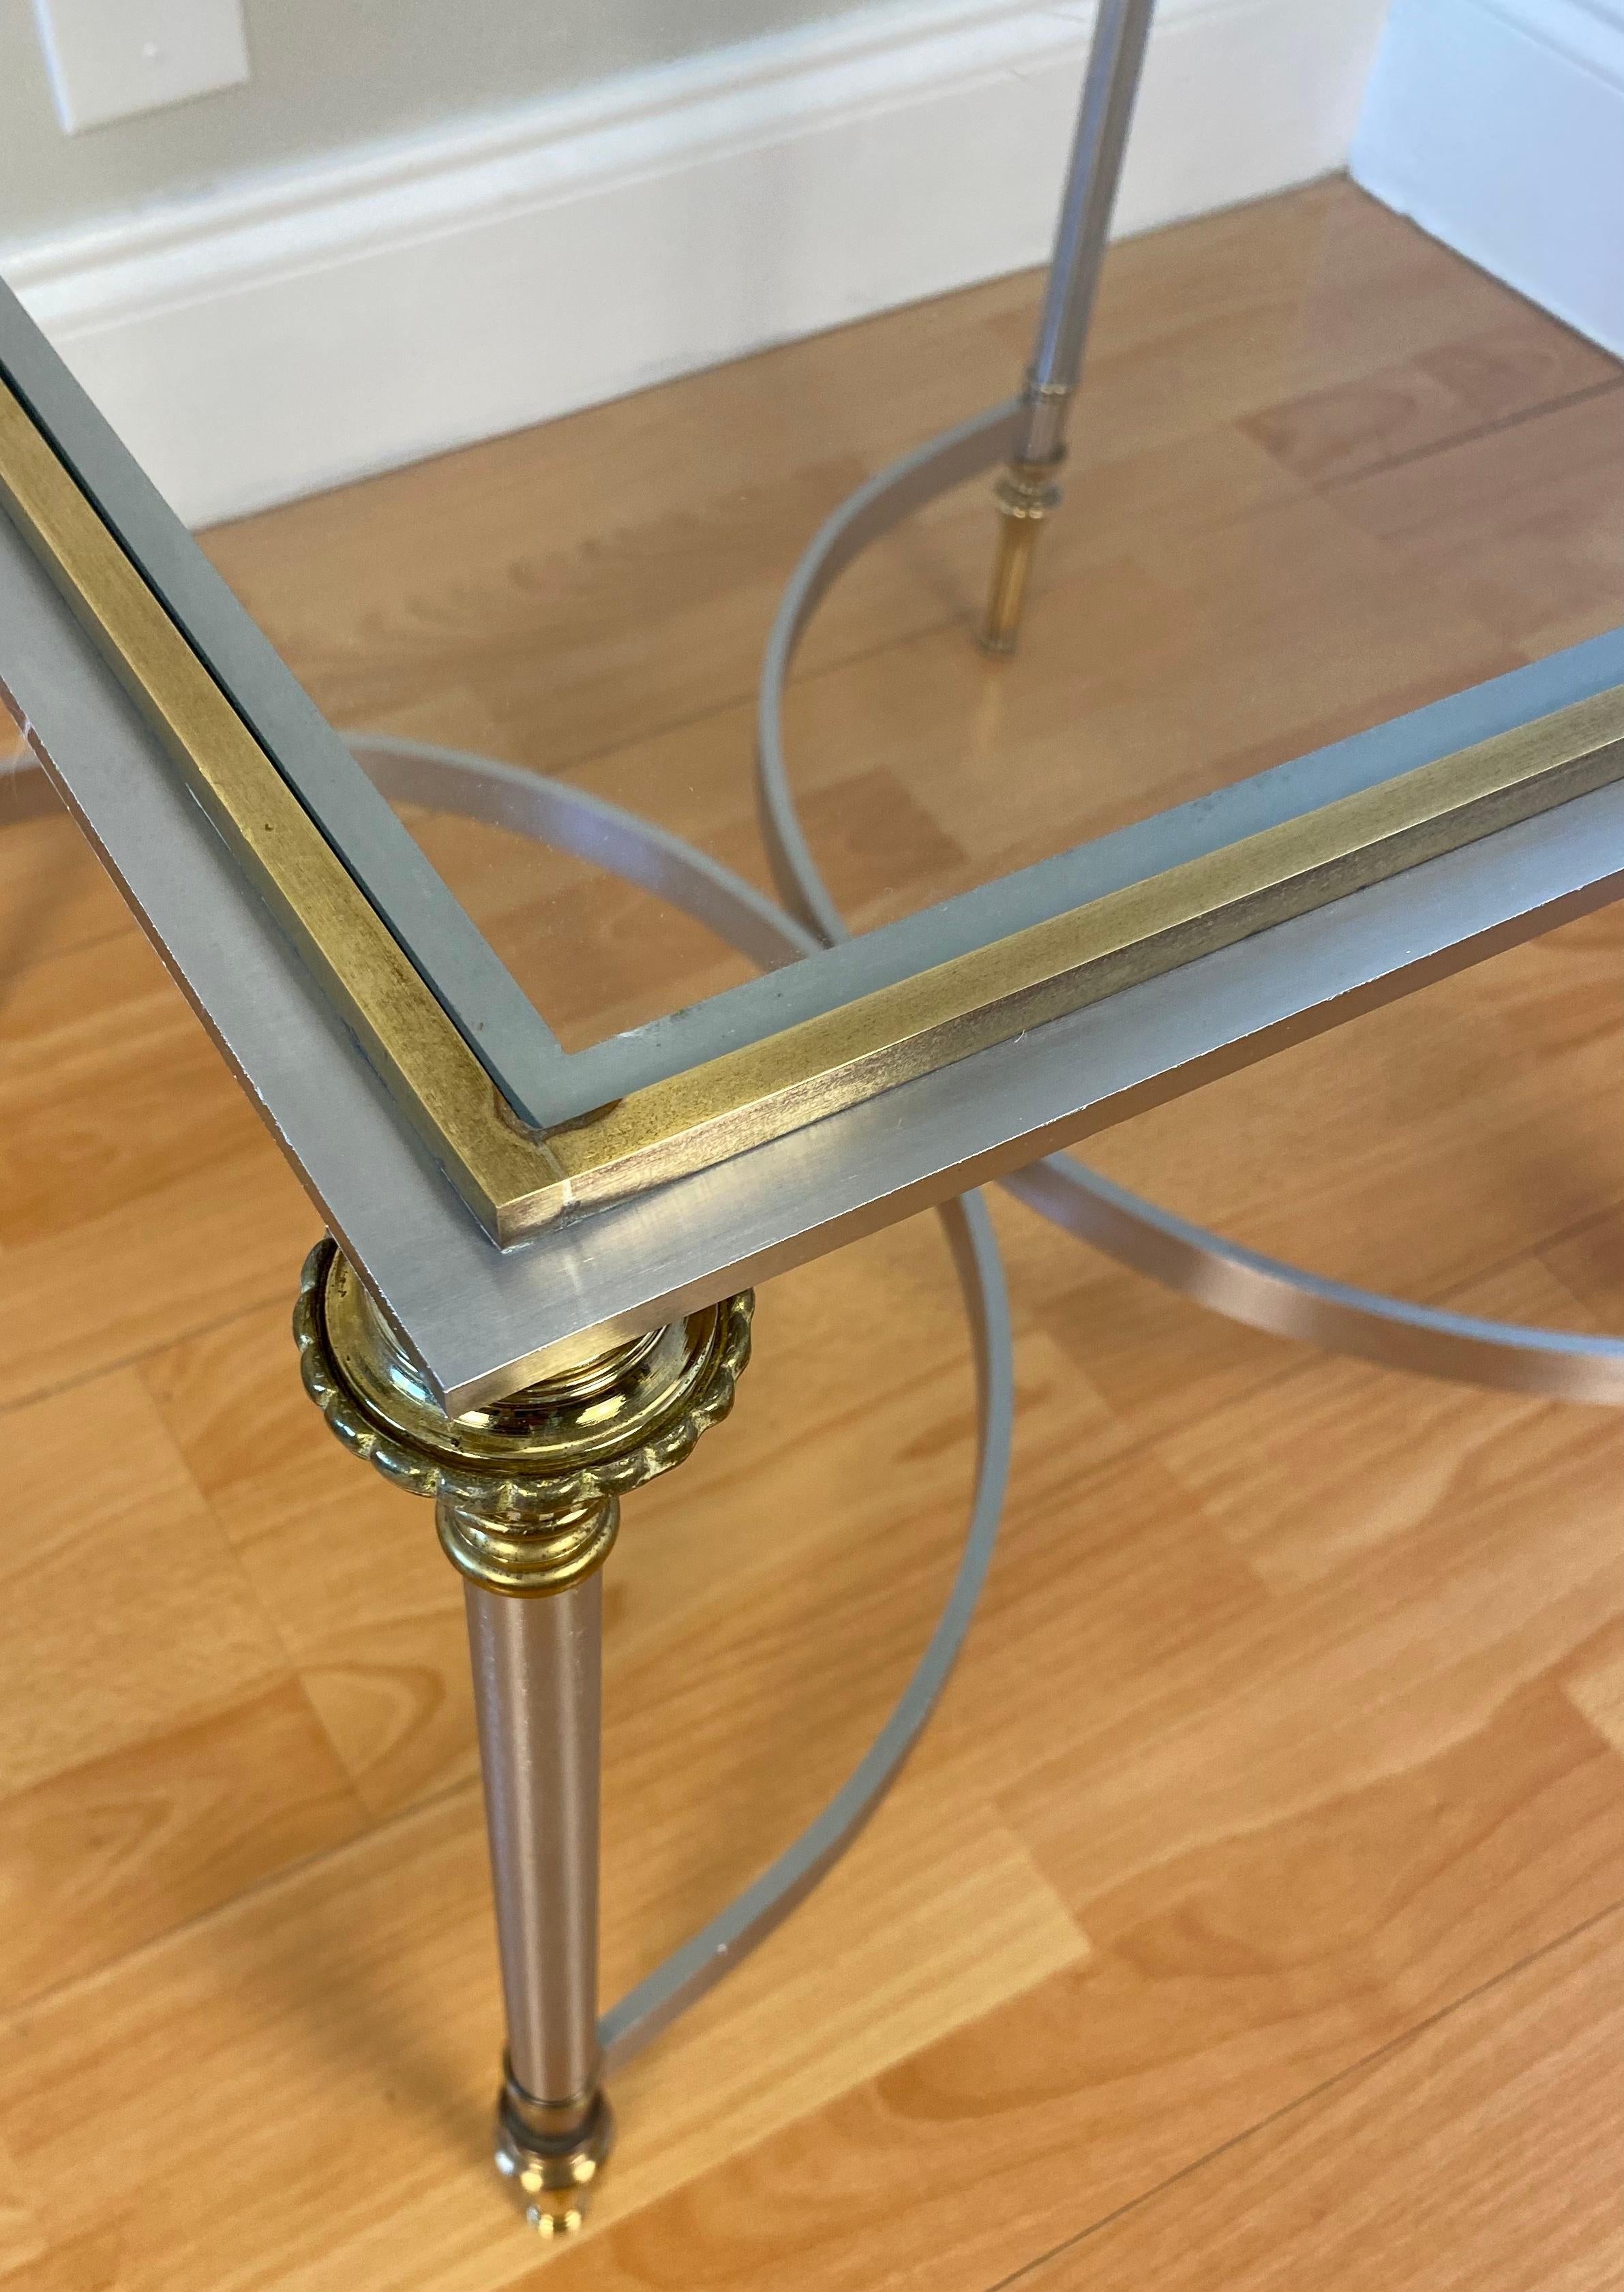 An Italian pair of Maison Jansen style brushed steel & brass end tables. 
Items feature brushed steel metal frames, brass accents, intentional and a beautiful antiqued finish. 

Very good quality vintage pair, interesting style, form and fine